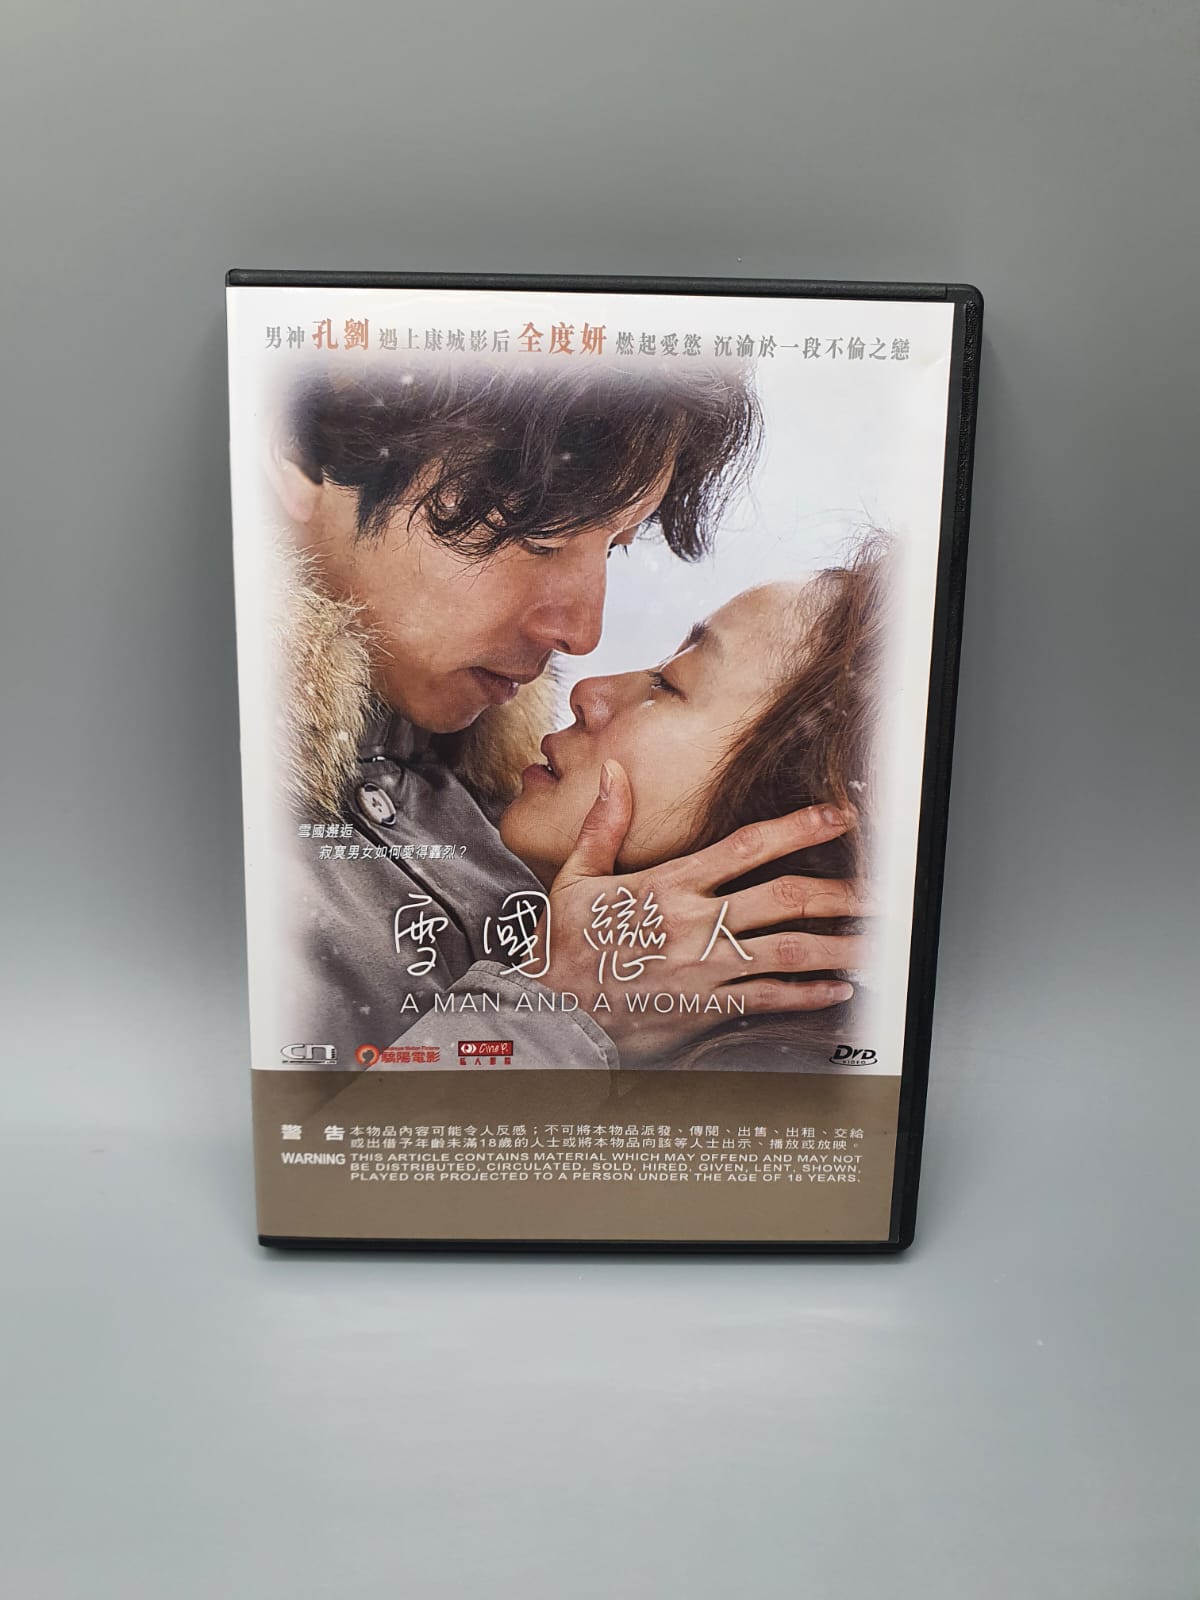 A Man and a Woman (2016) (Blu-ray) Subtitle: English/Traditional Chinese Korean Movie Jeon Do Yeon Gong Yoo